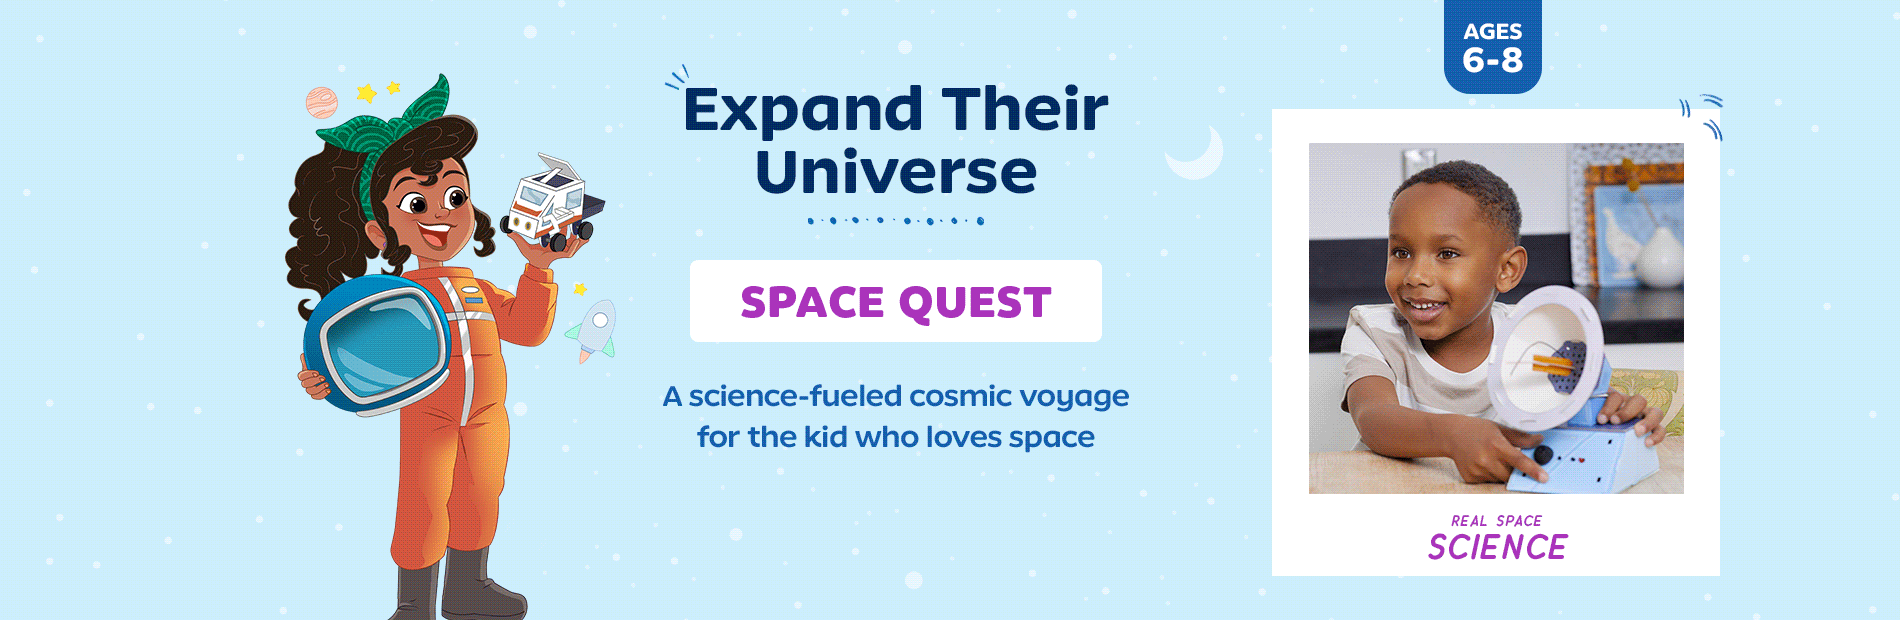 Expand Their Universe SPACE QUEST A science-fueled cosmic voyage for the kid who loves space